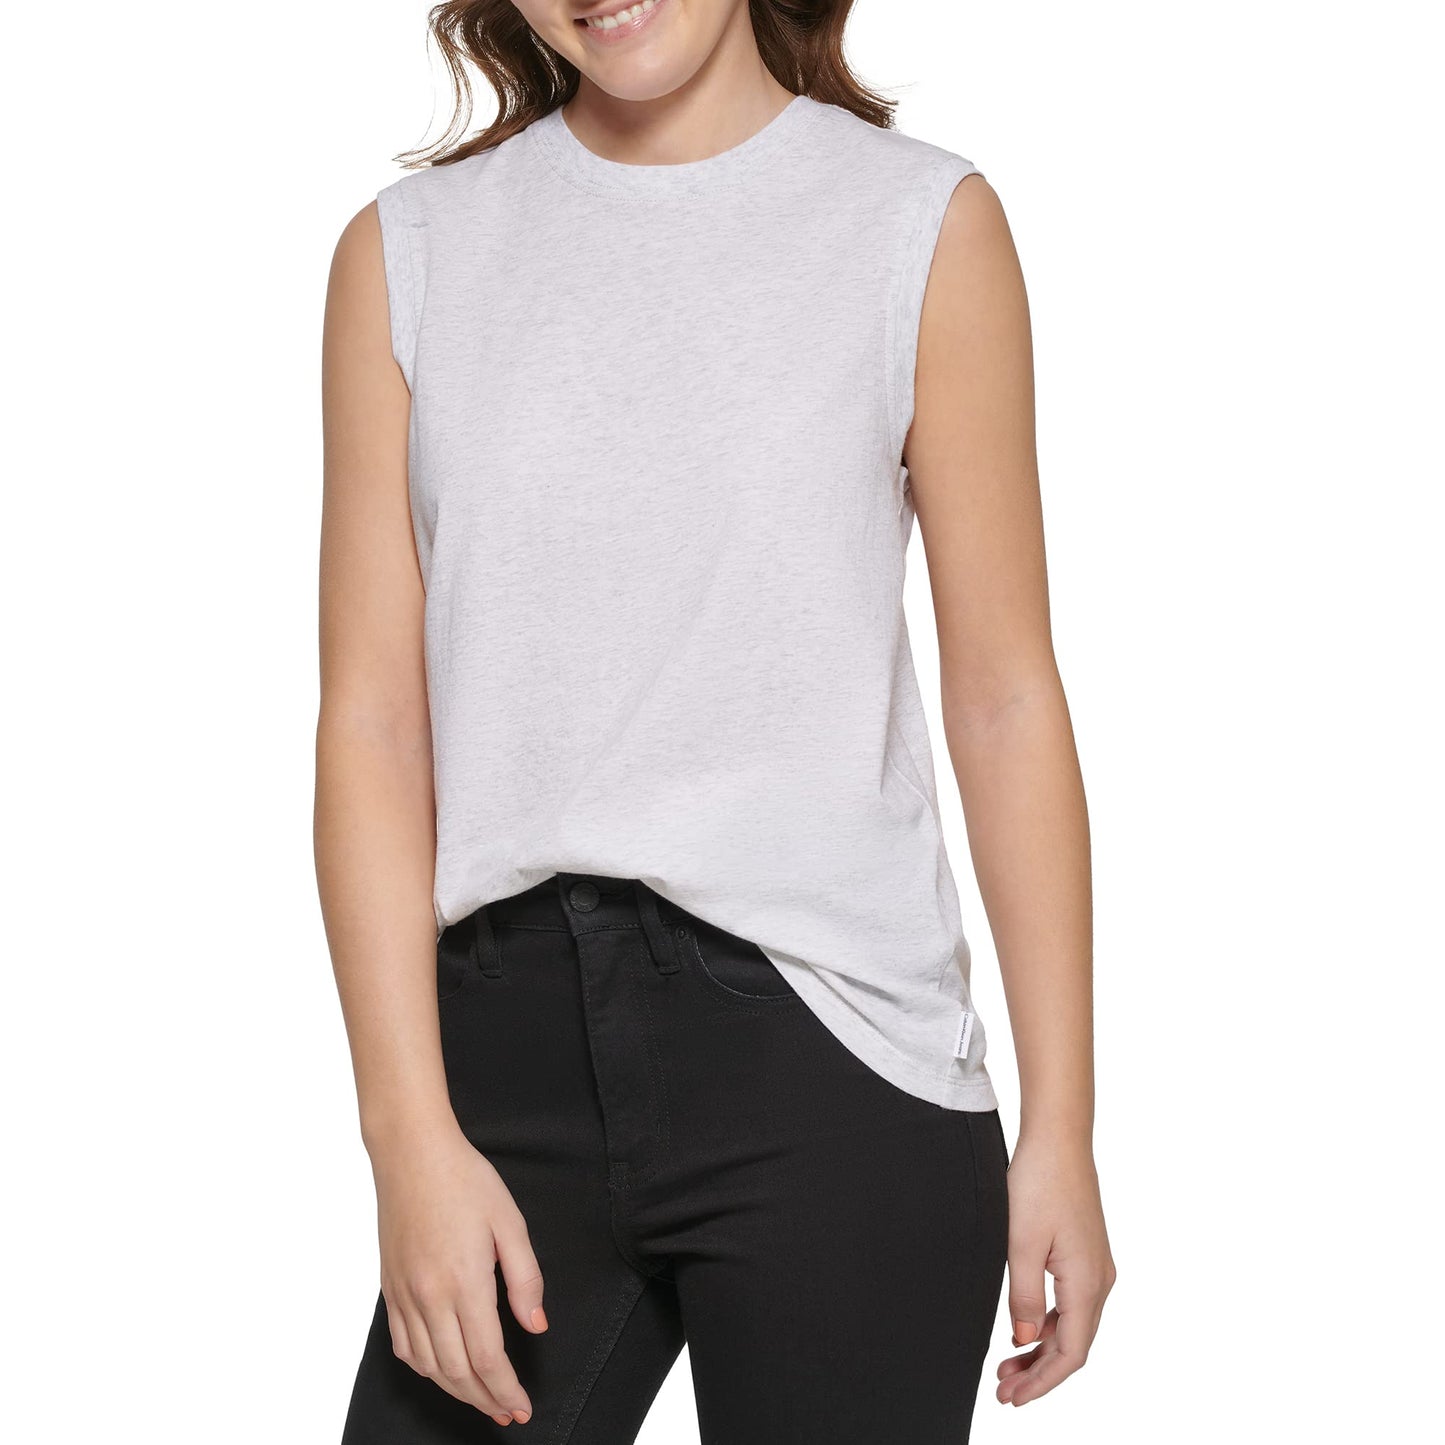 Calvin Klein Jeans Women's Crew Neck Muscle Tee, Optic Heather, Extra Large